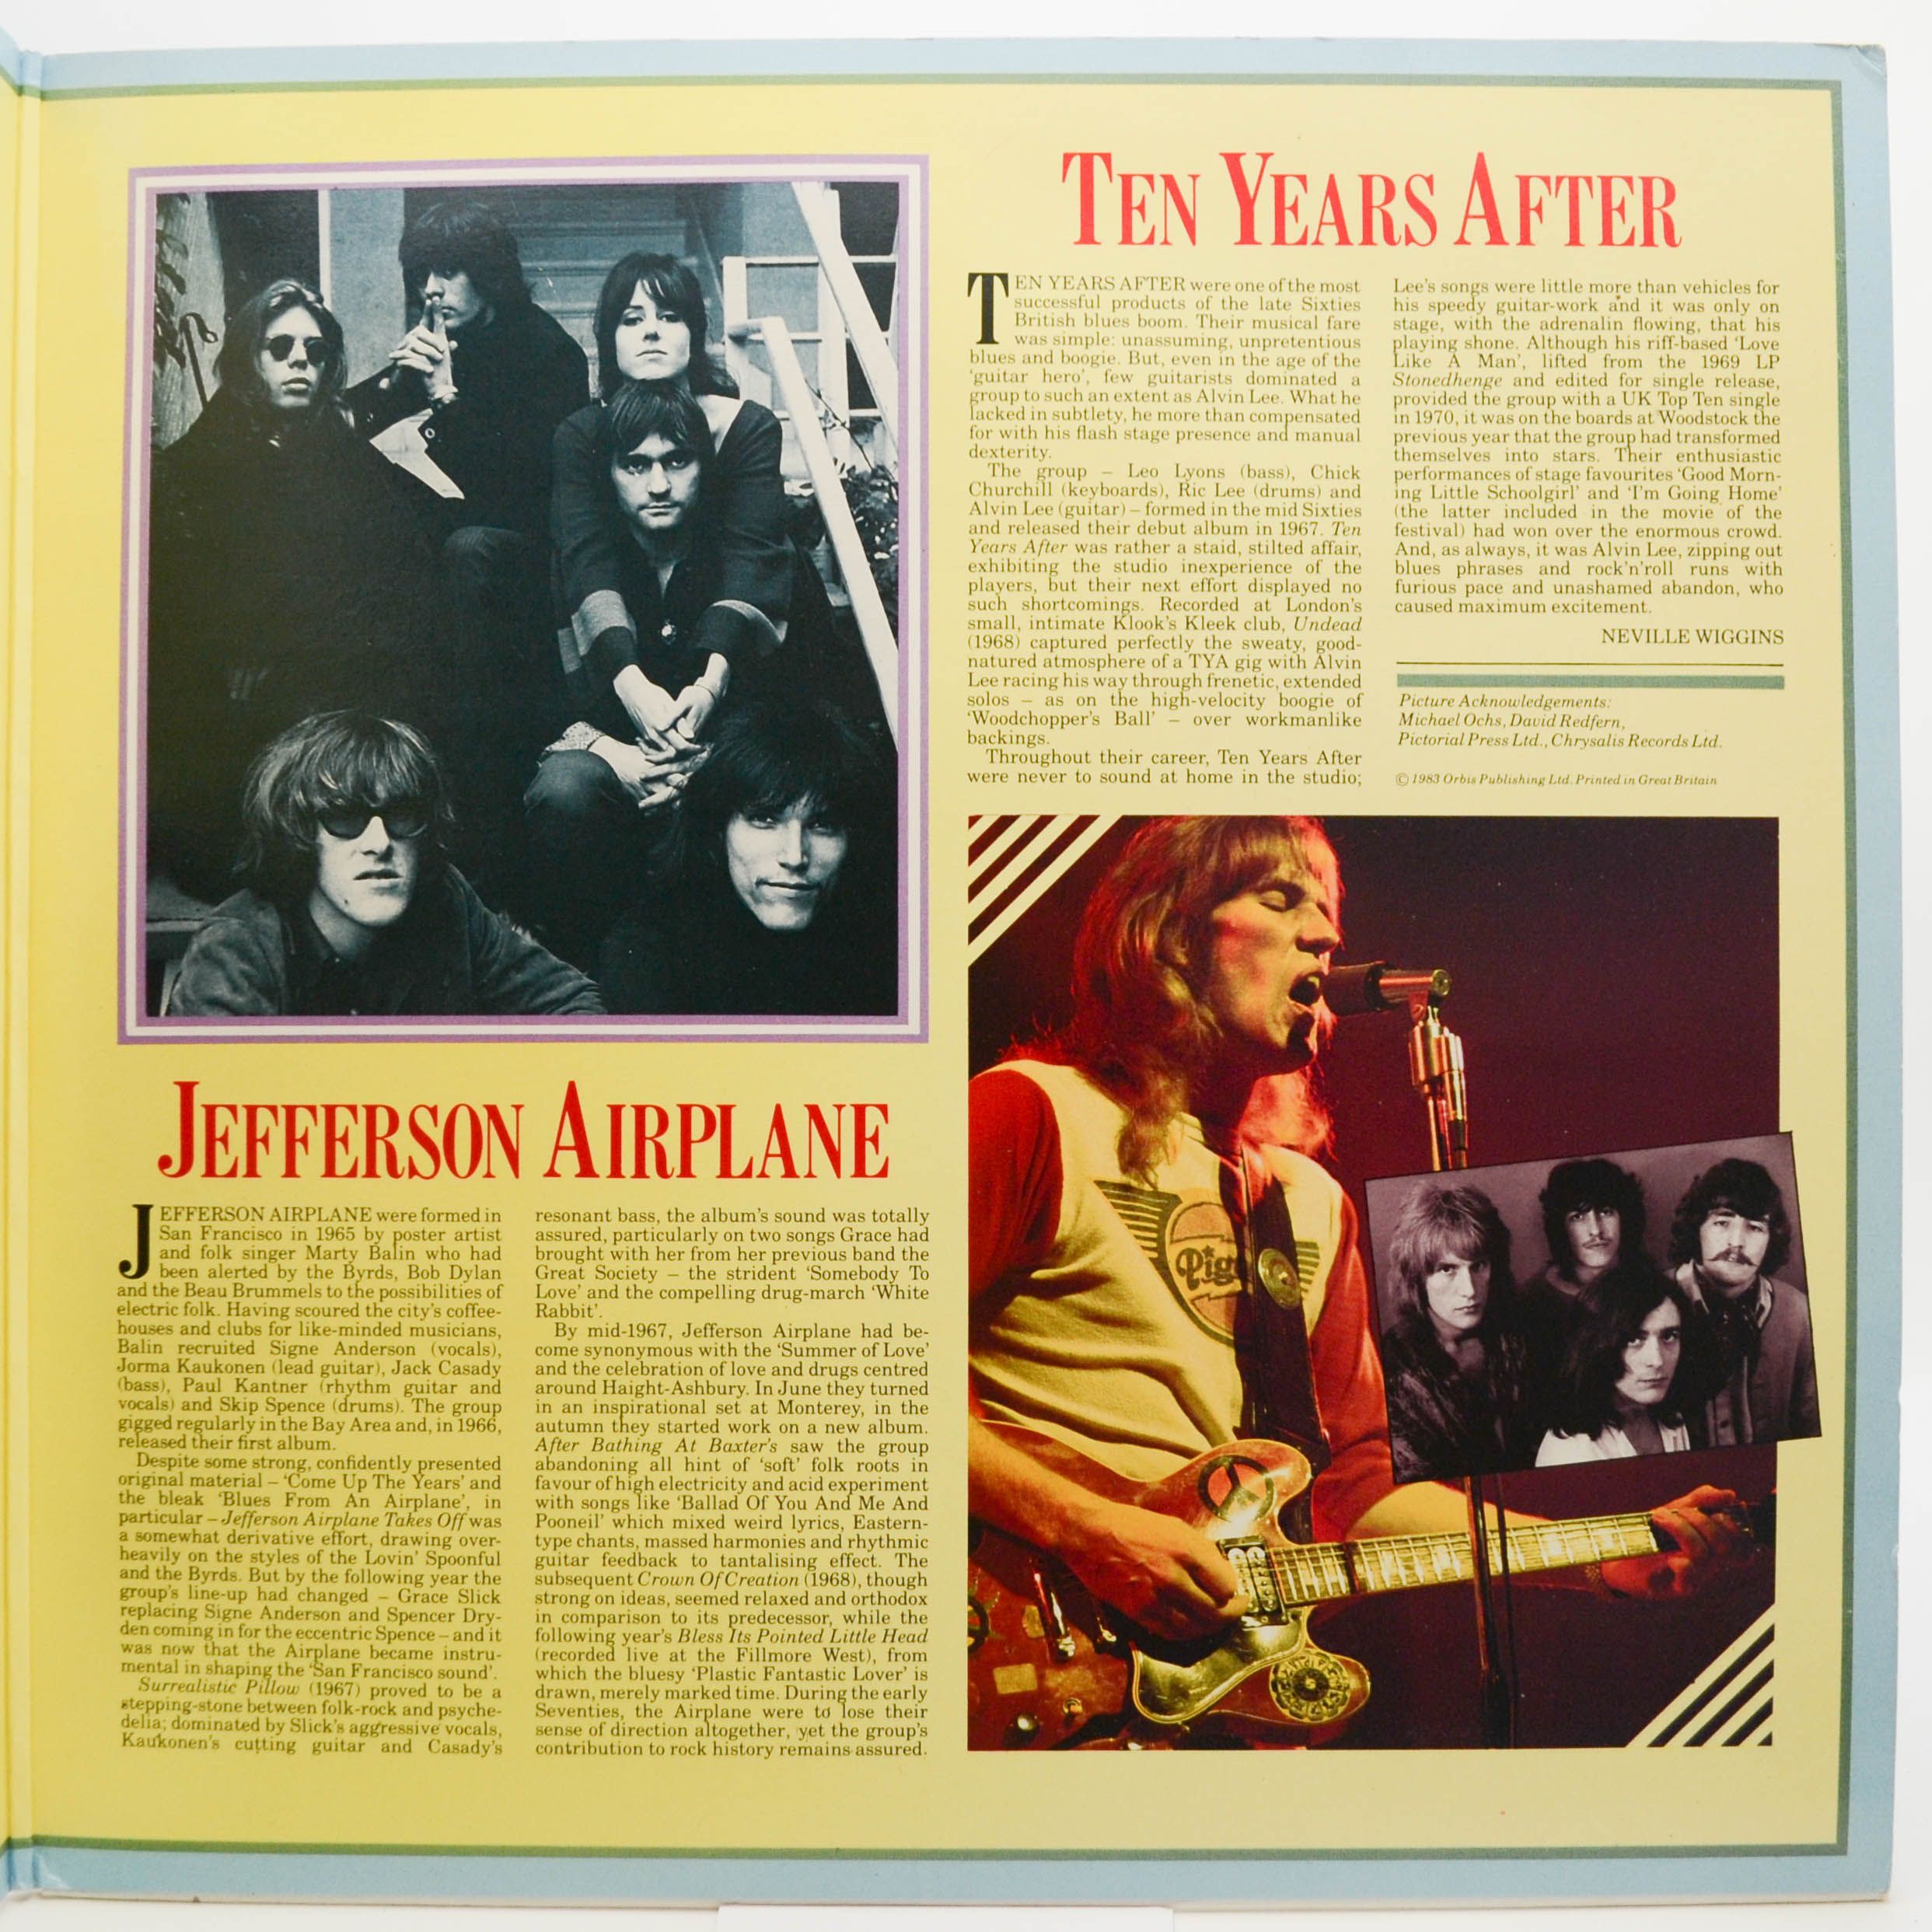 Creedence Clearwater Revival / Ten Years After / Jefferson Airplane / Sly & The Family Stone — The History Of Rock (Volume Seventeen) (2LP, UK), 1983